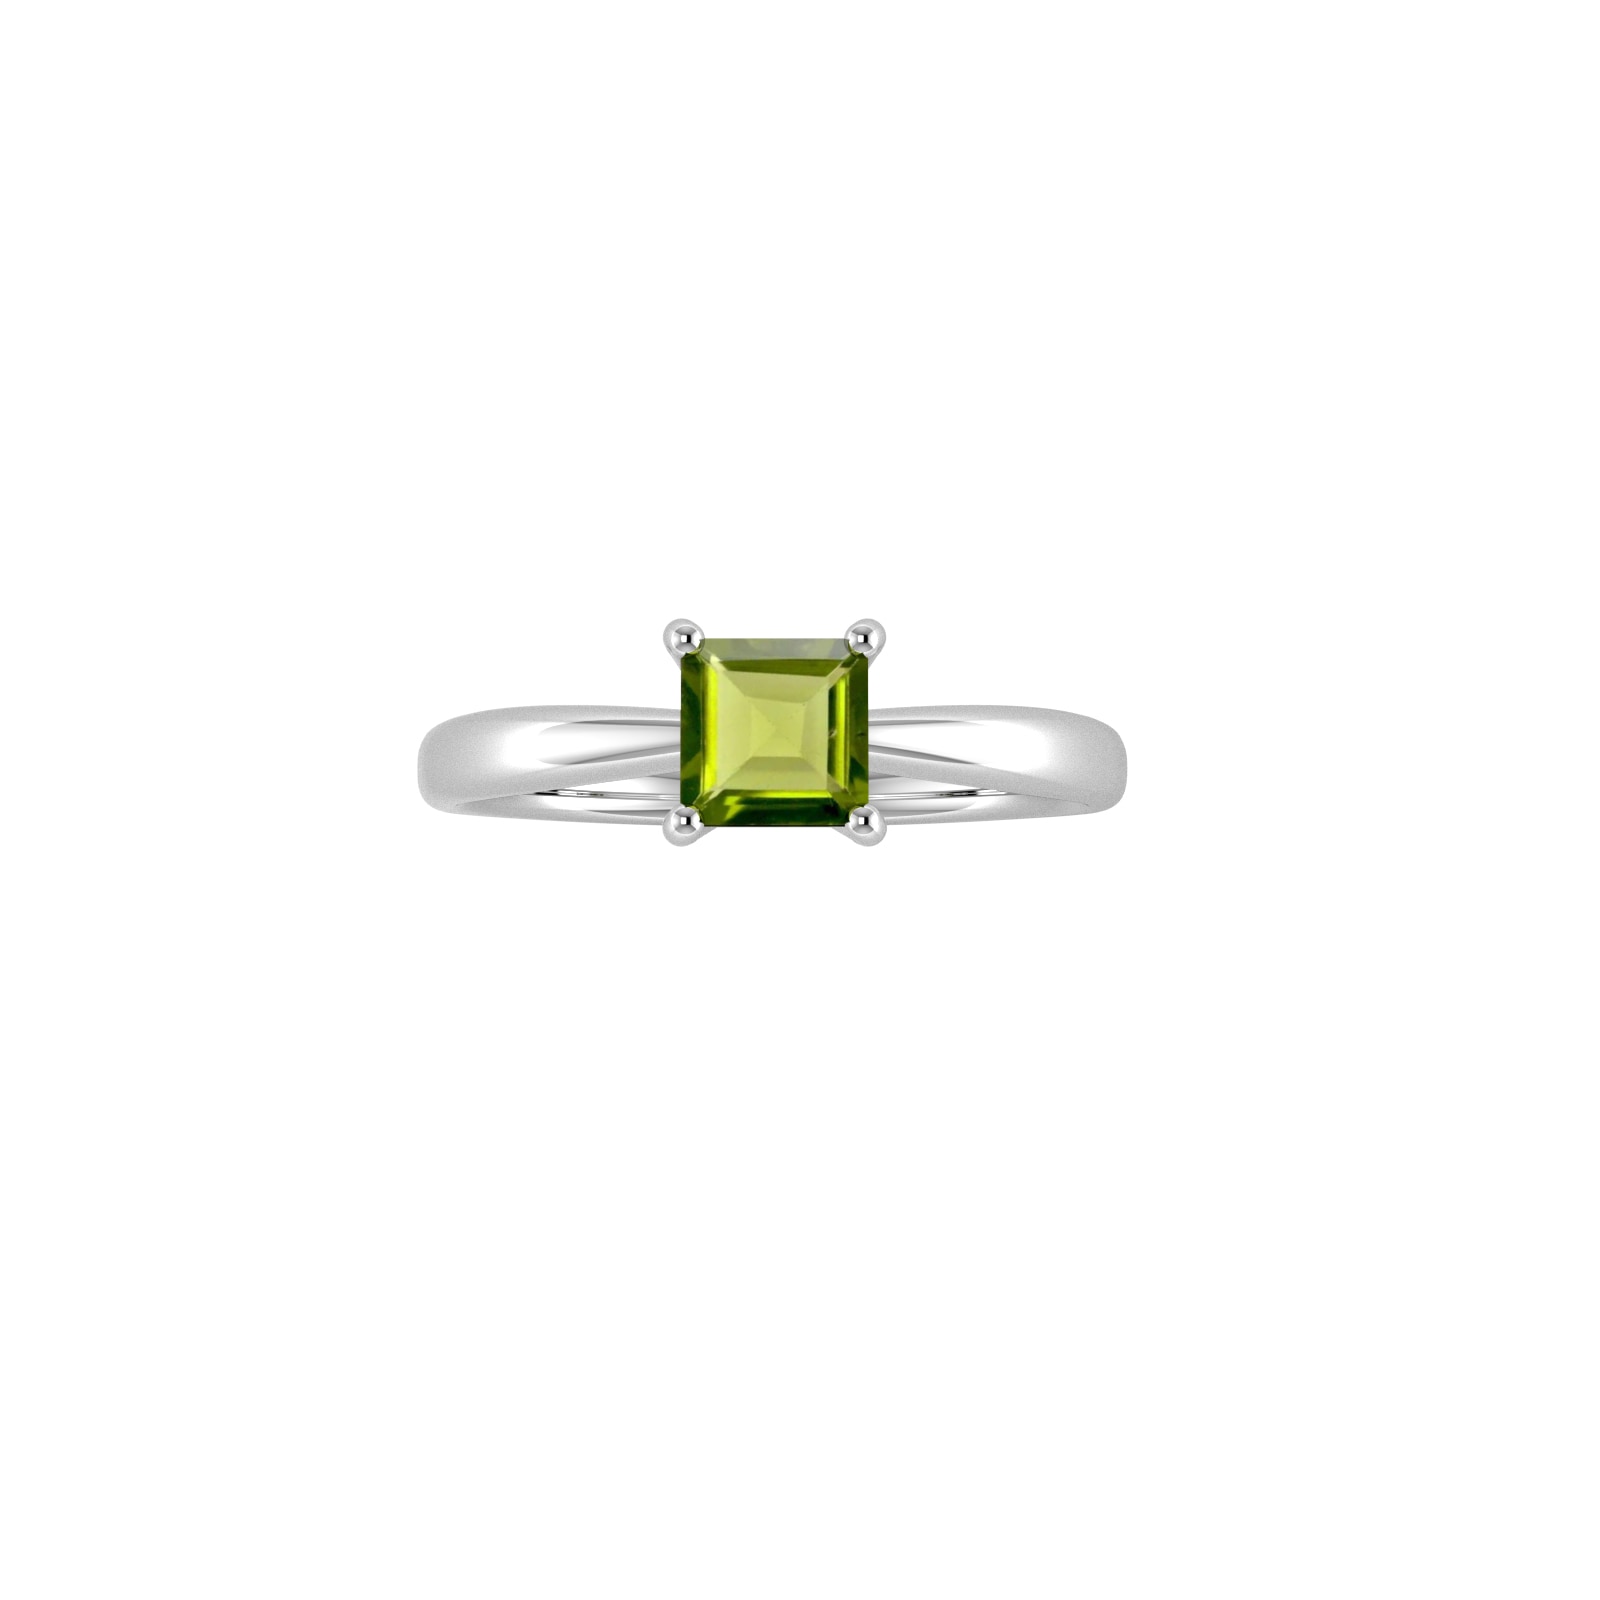 9ct White Gold 4 Claw Square Peridot 5mm x 5mm Ring- Ring Size Q